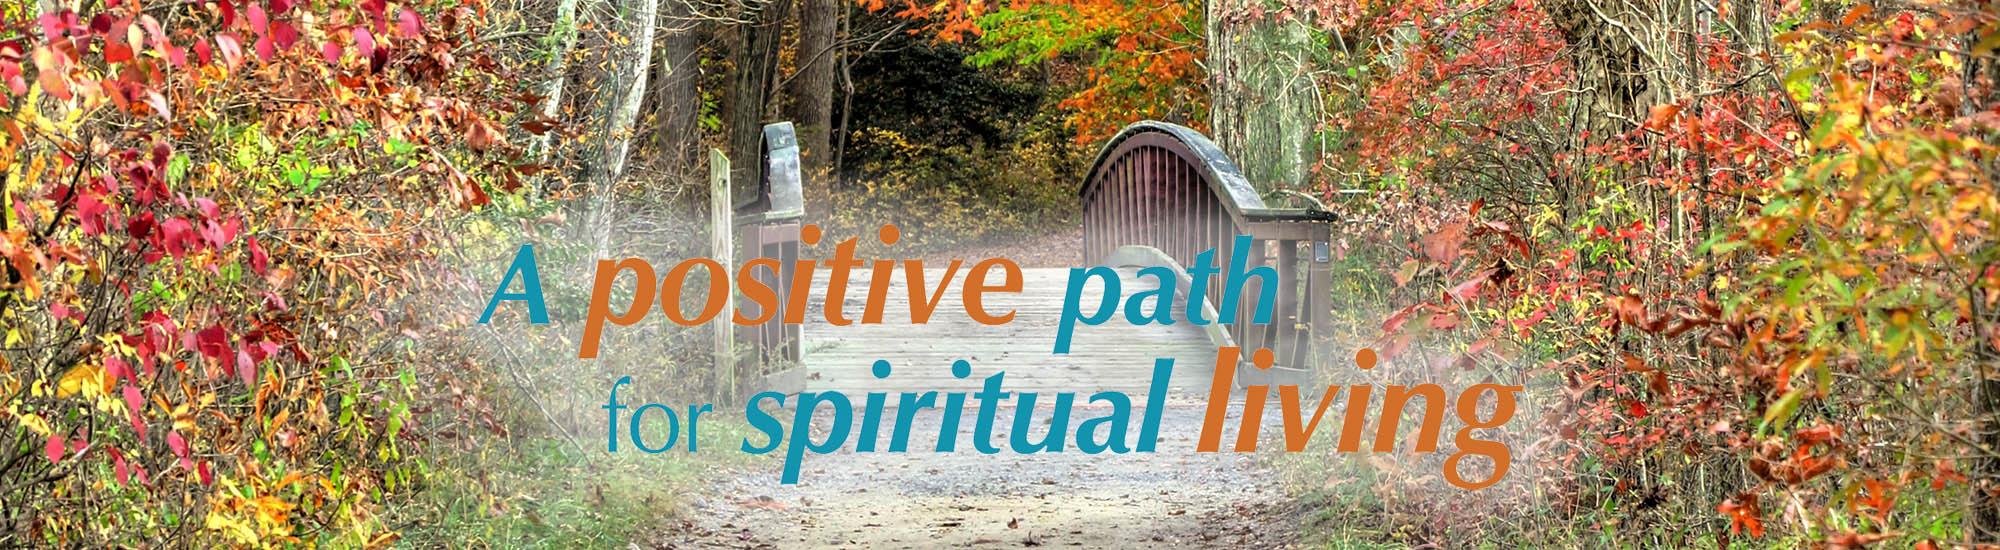 A positive path for Spiritual Living. image of path with bridge.